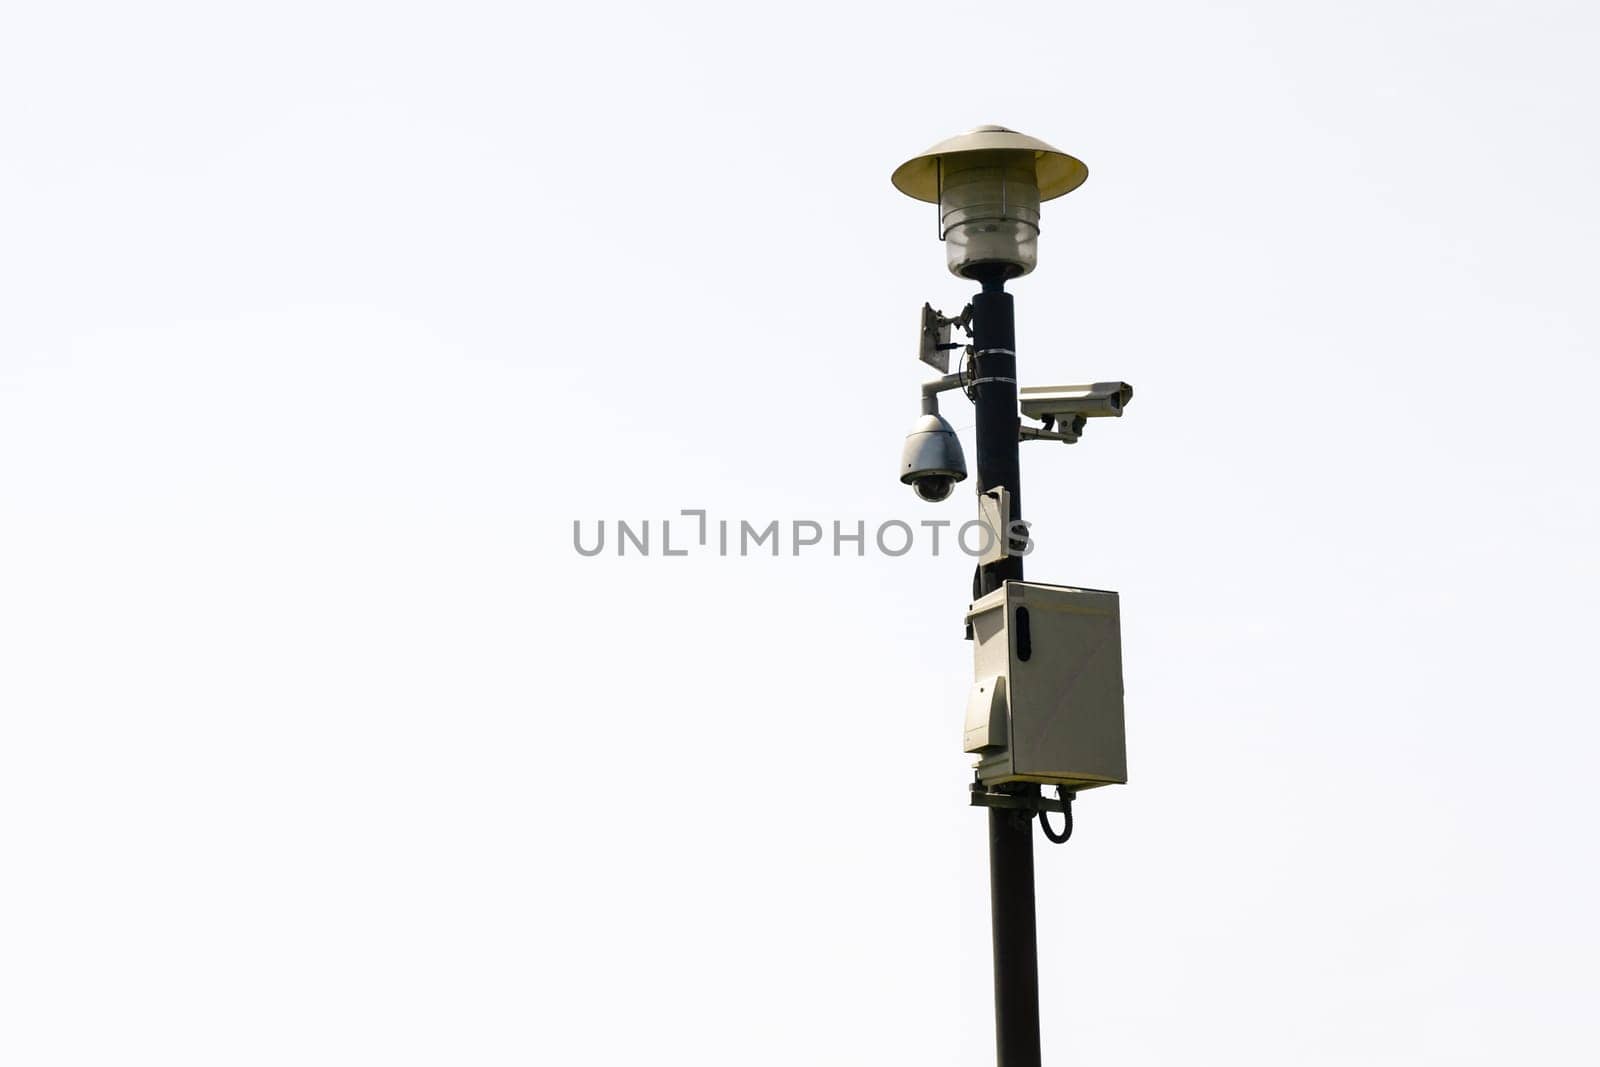 Surveillance cameras on street lamp.
Isolated on white background.
